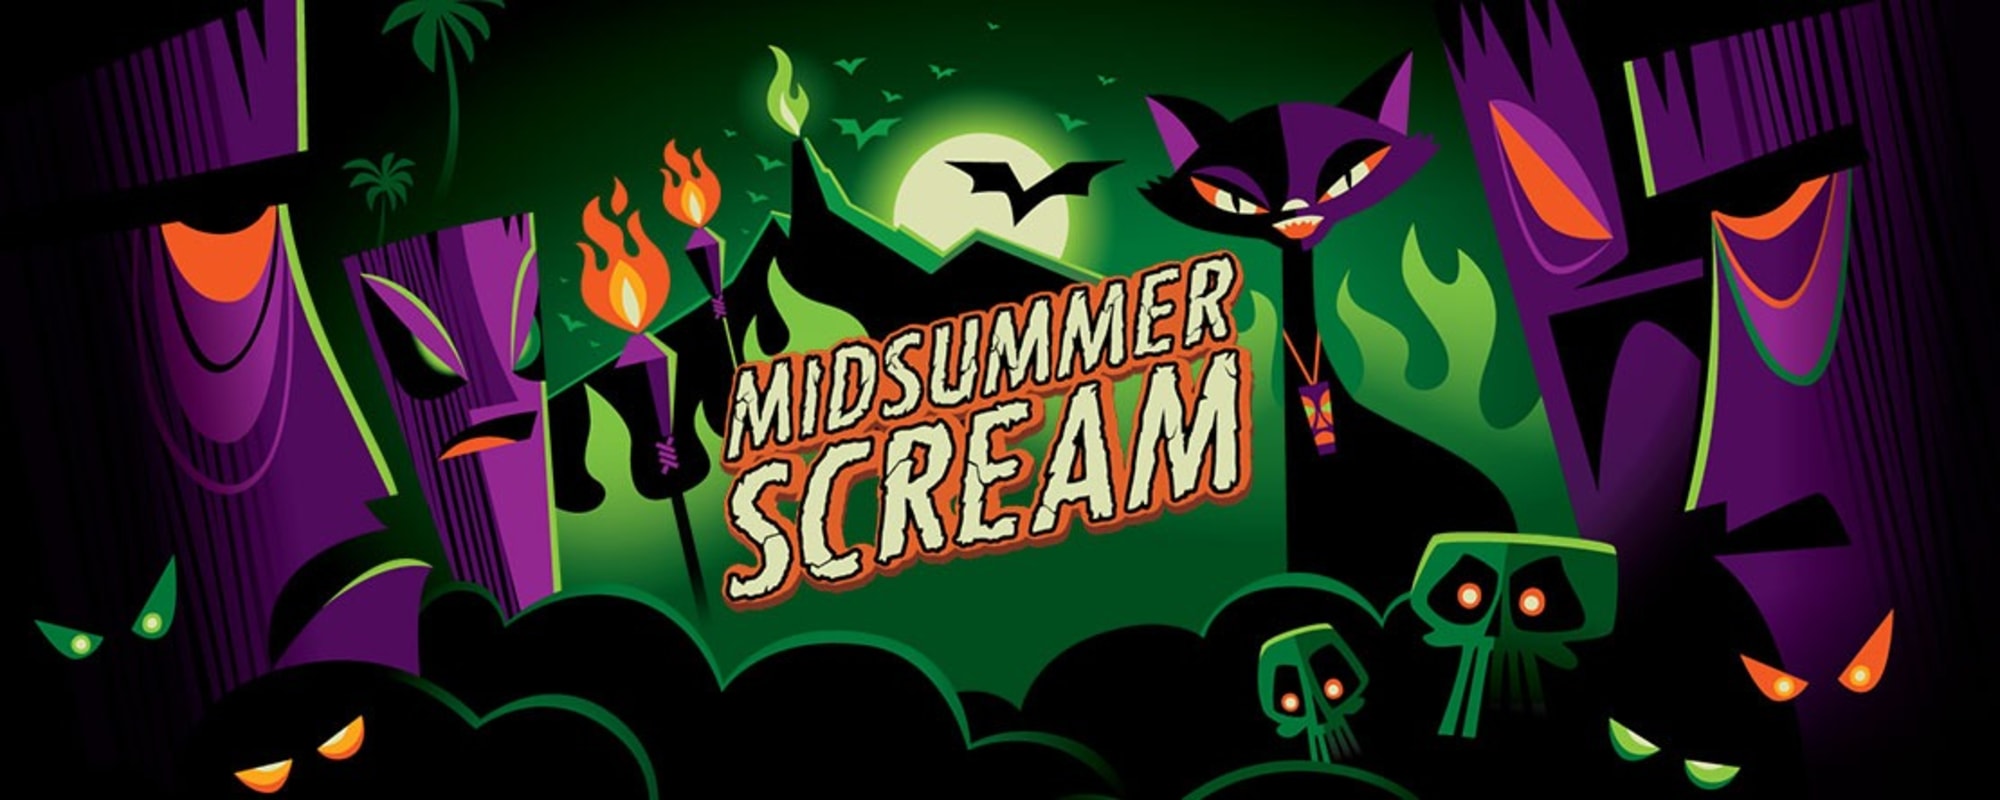 Midsummer Scream 2019 Five Bloody Festival Highlights Page 2